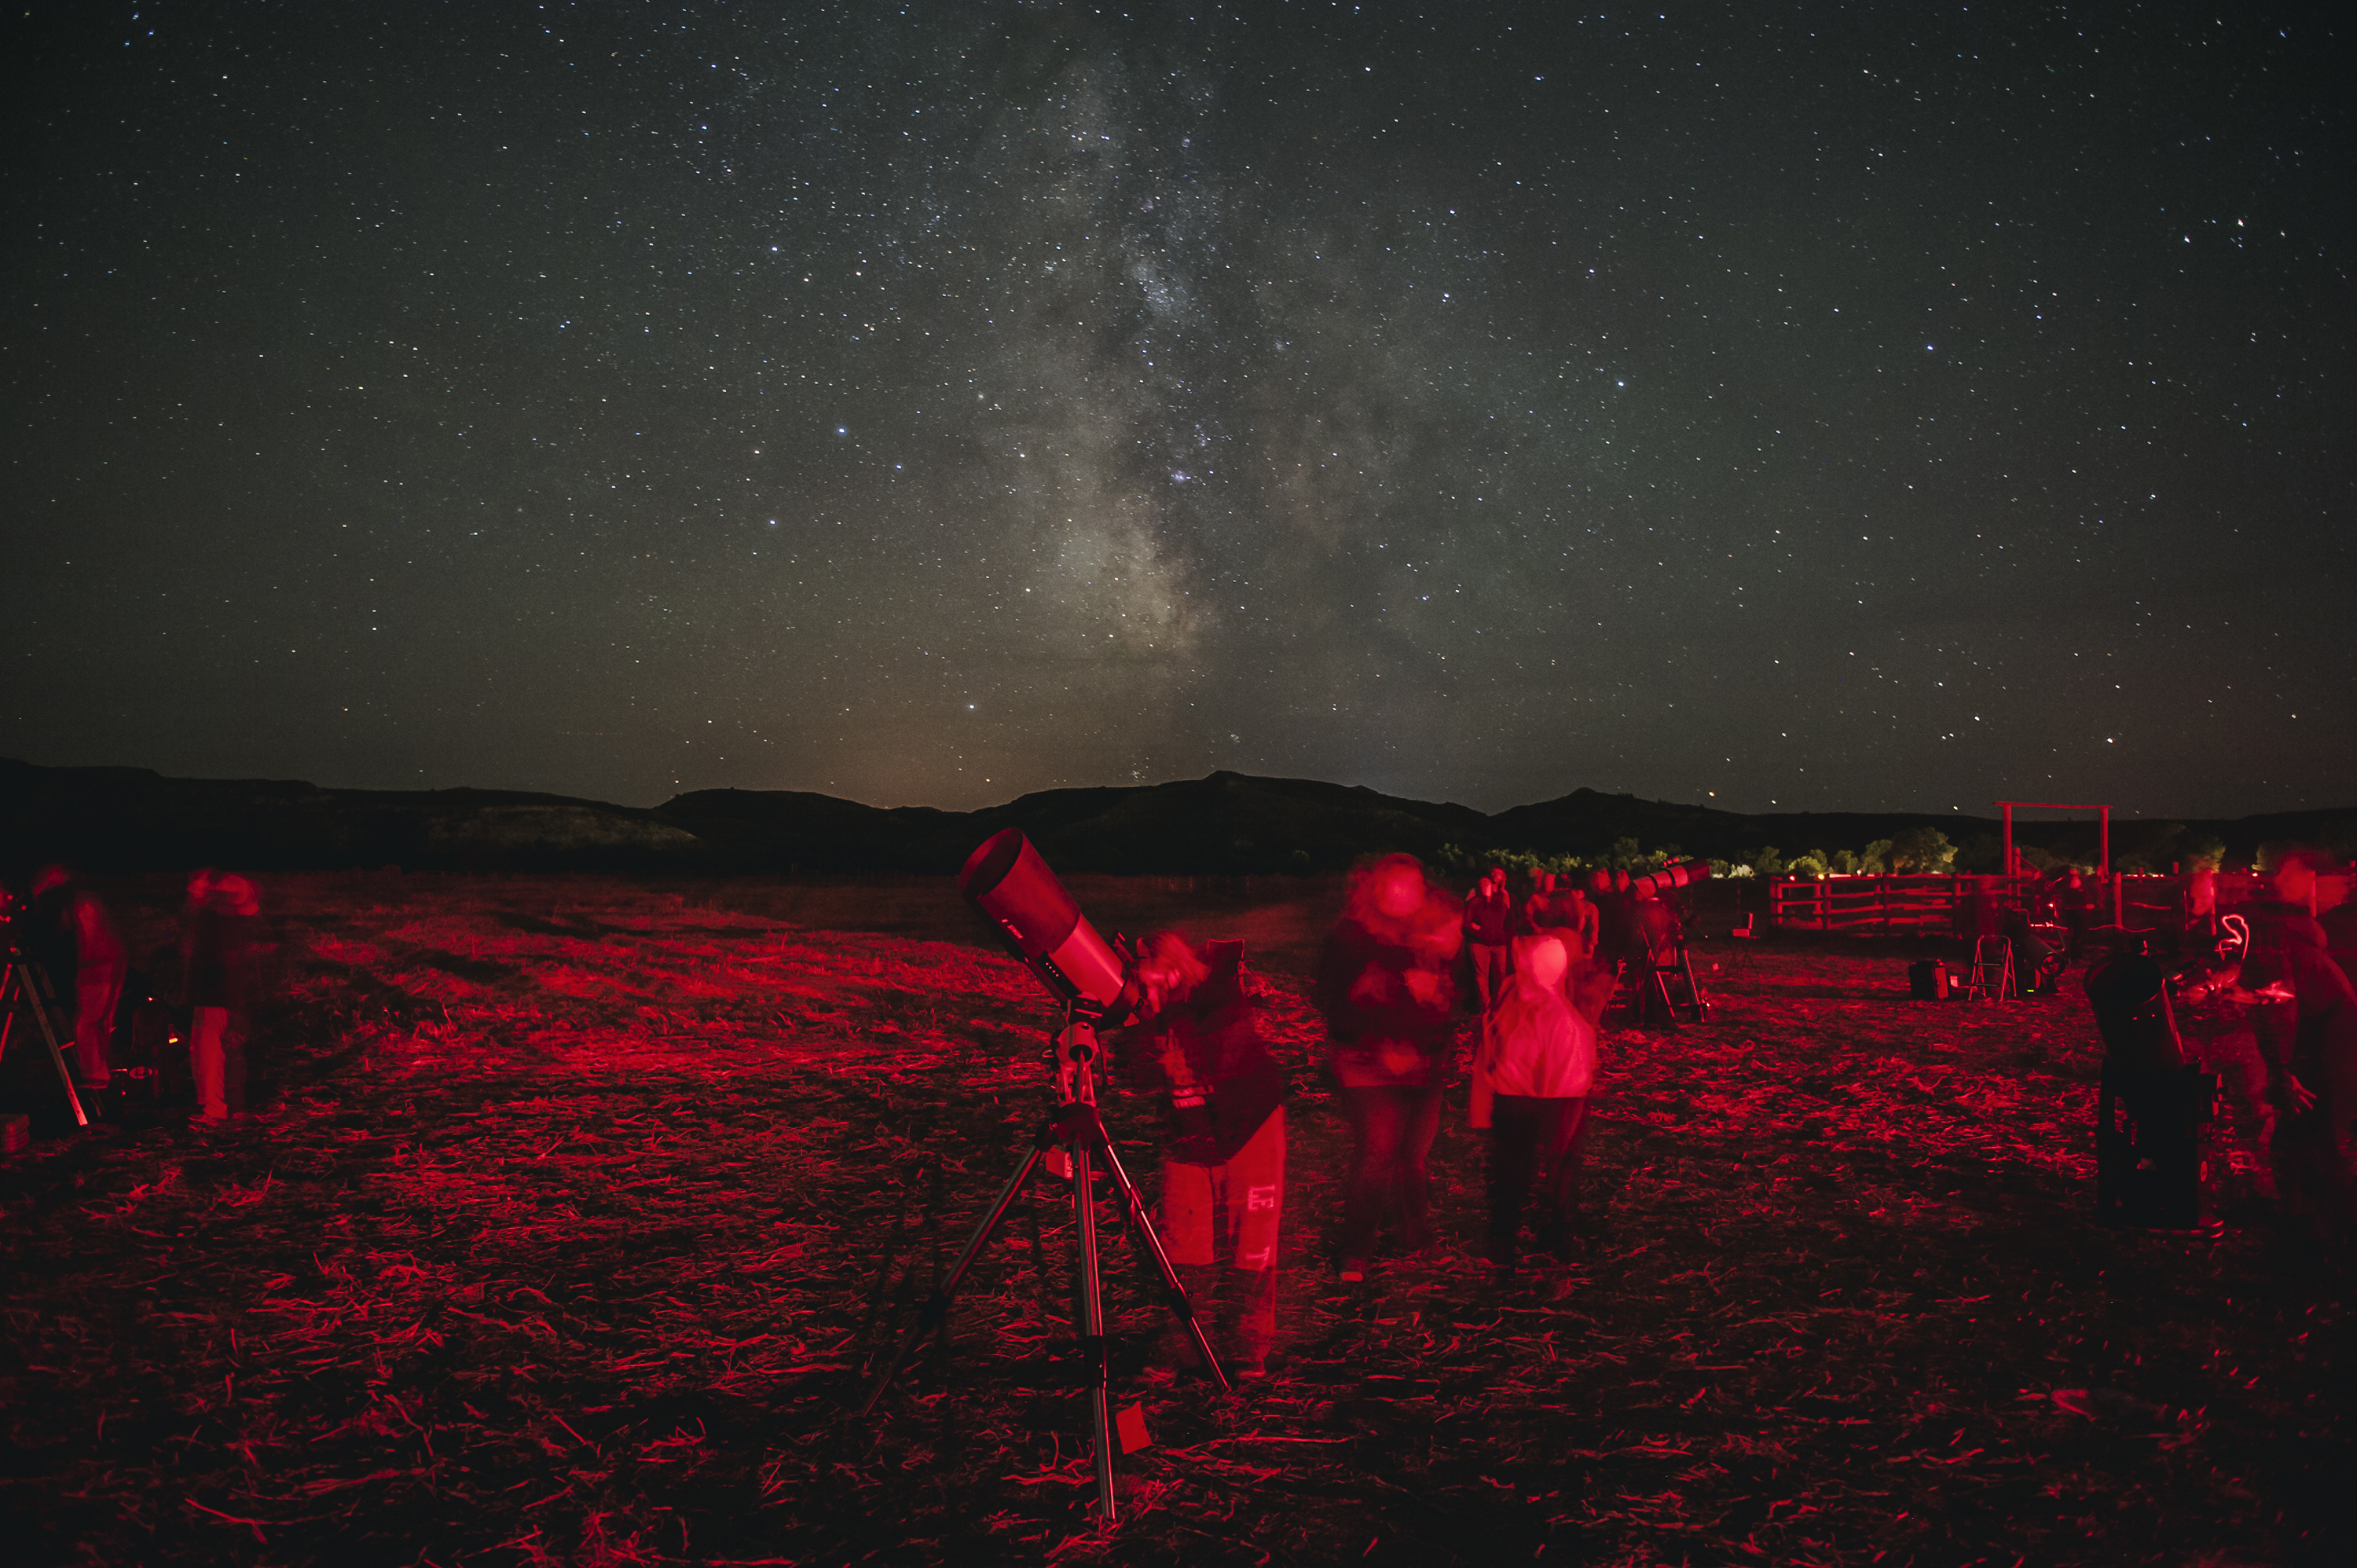 Star gazers flock to the south unit of Theodore Roosevelt National Park in western North Dakota for the annual Dakota Nights Astronomy Festival. Red lights were used during the event to help people move between telescopes without ruining their night vision. Between 2010 and 2013, the amount of non-natural light visible from the park increased by 500 percent, more than in any other national park. Andrew Cullen